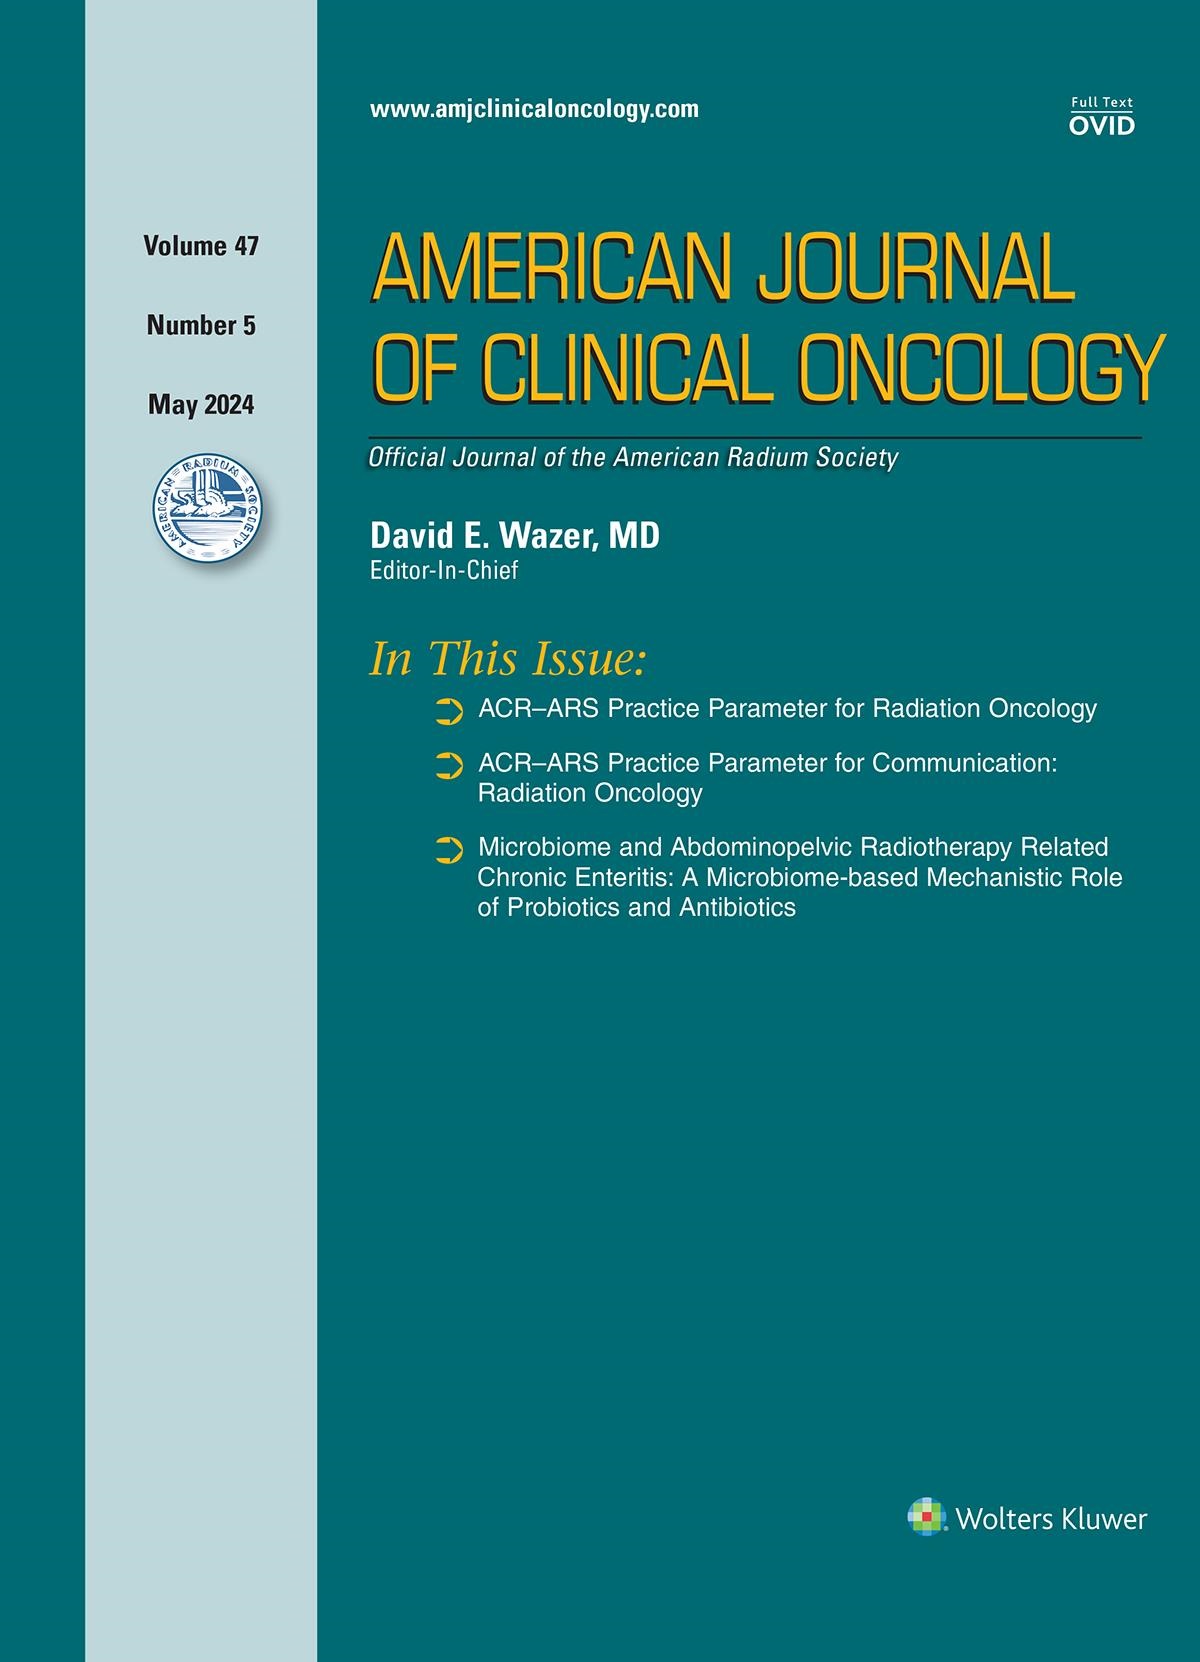 ACR–ARS Practice Parameter for Communication: Radiation Oncology